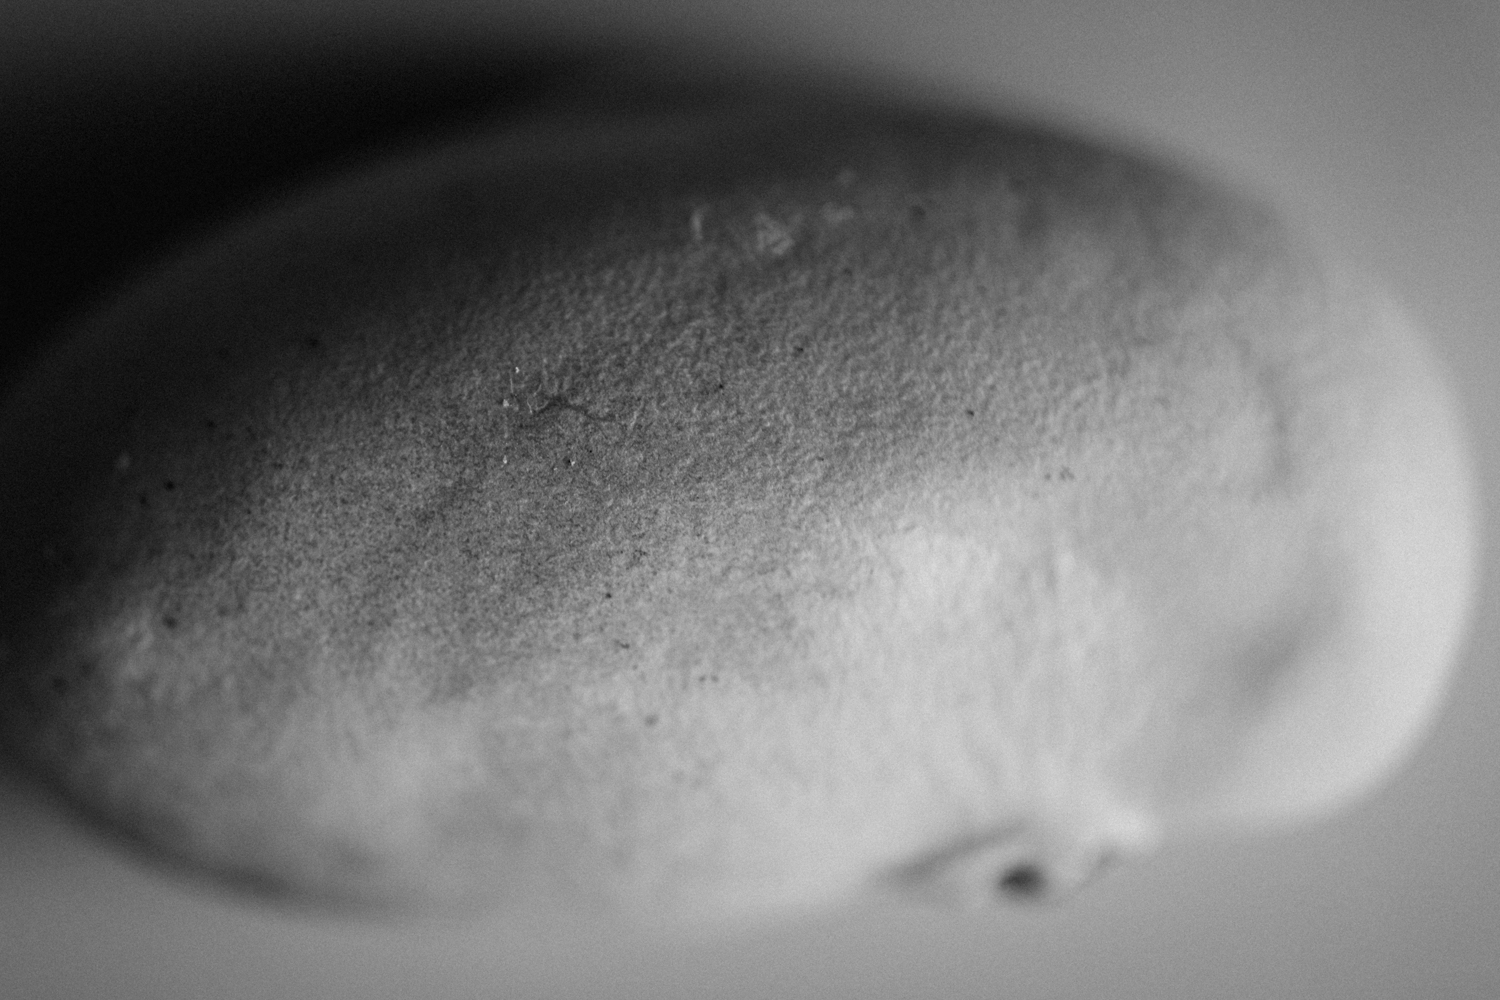 Tactile found objects black and white photo of a Jackfruit seed